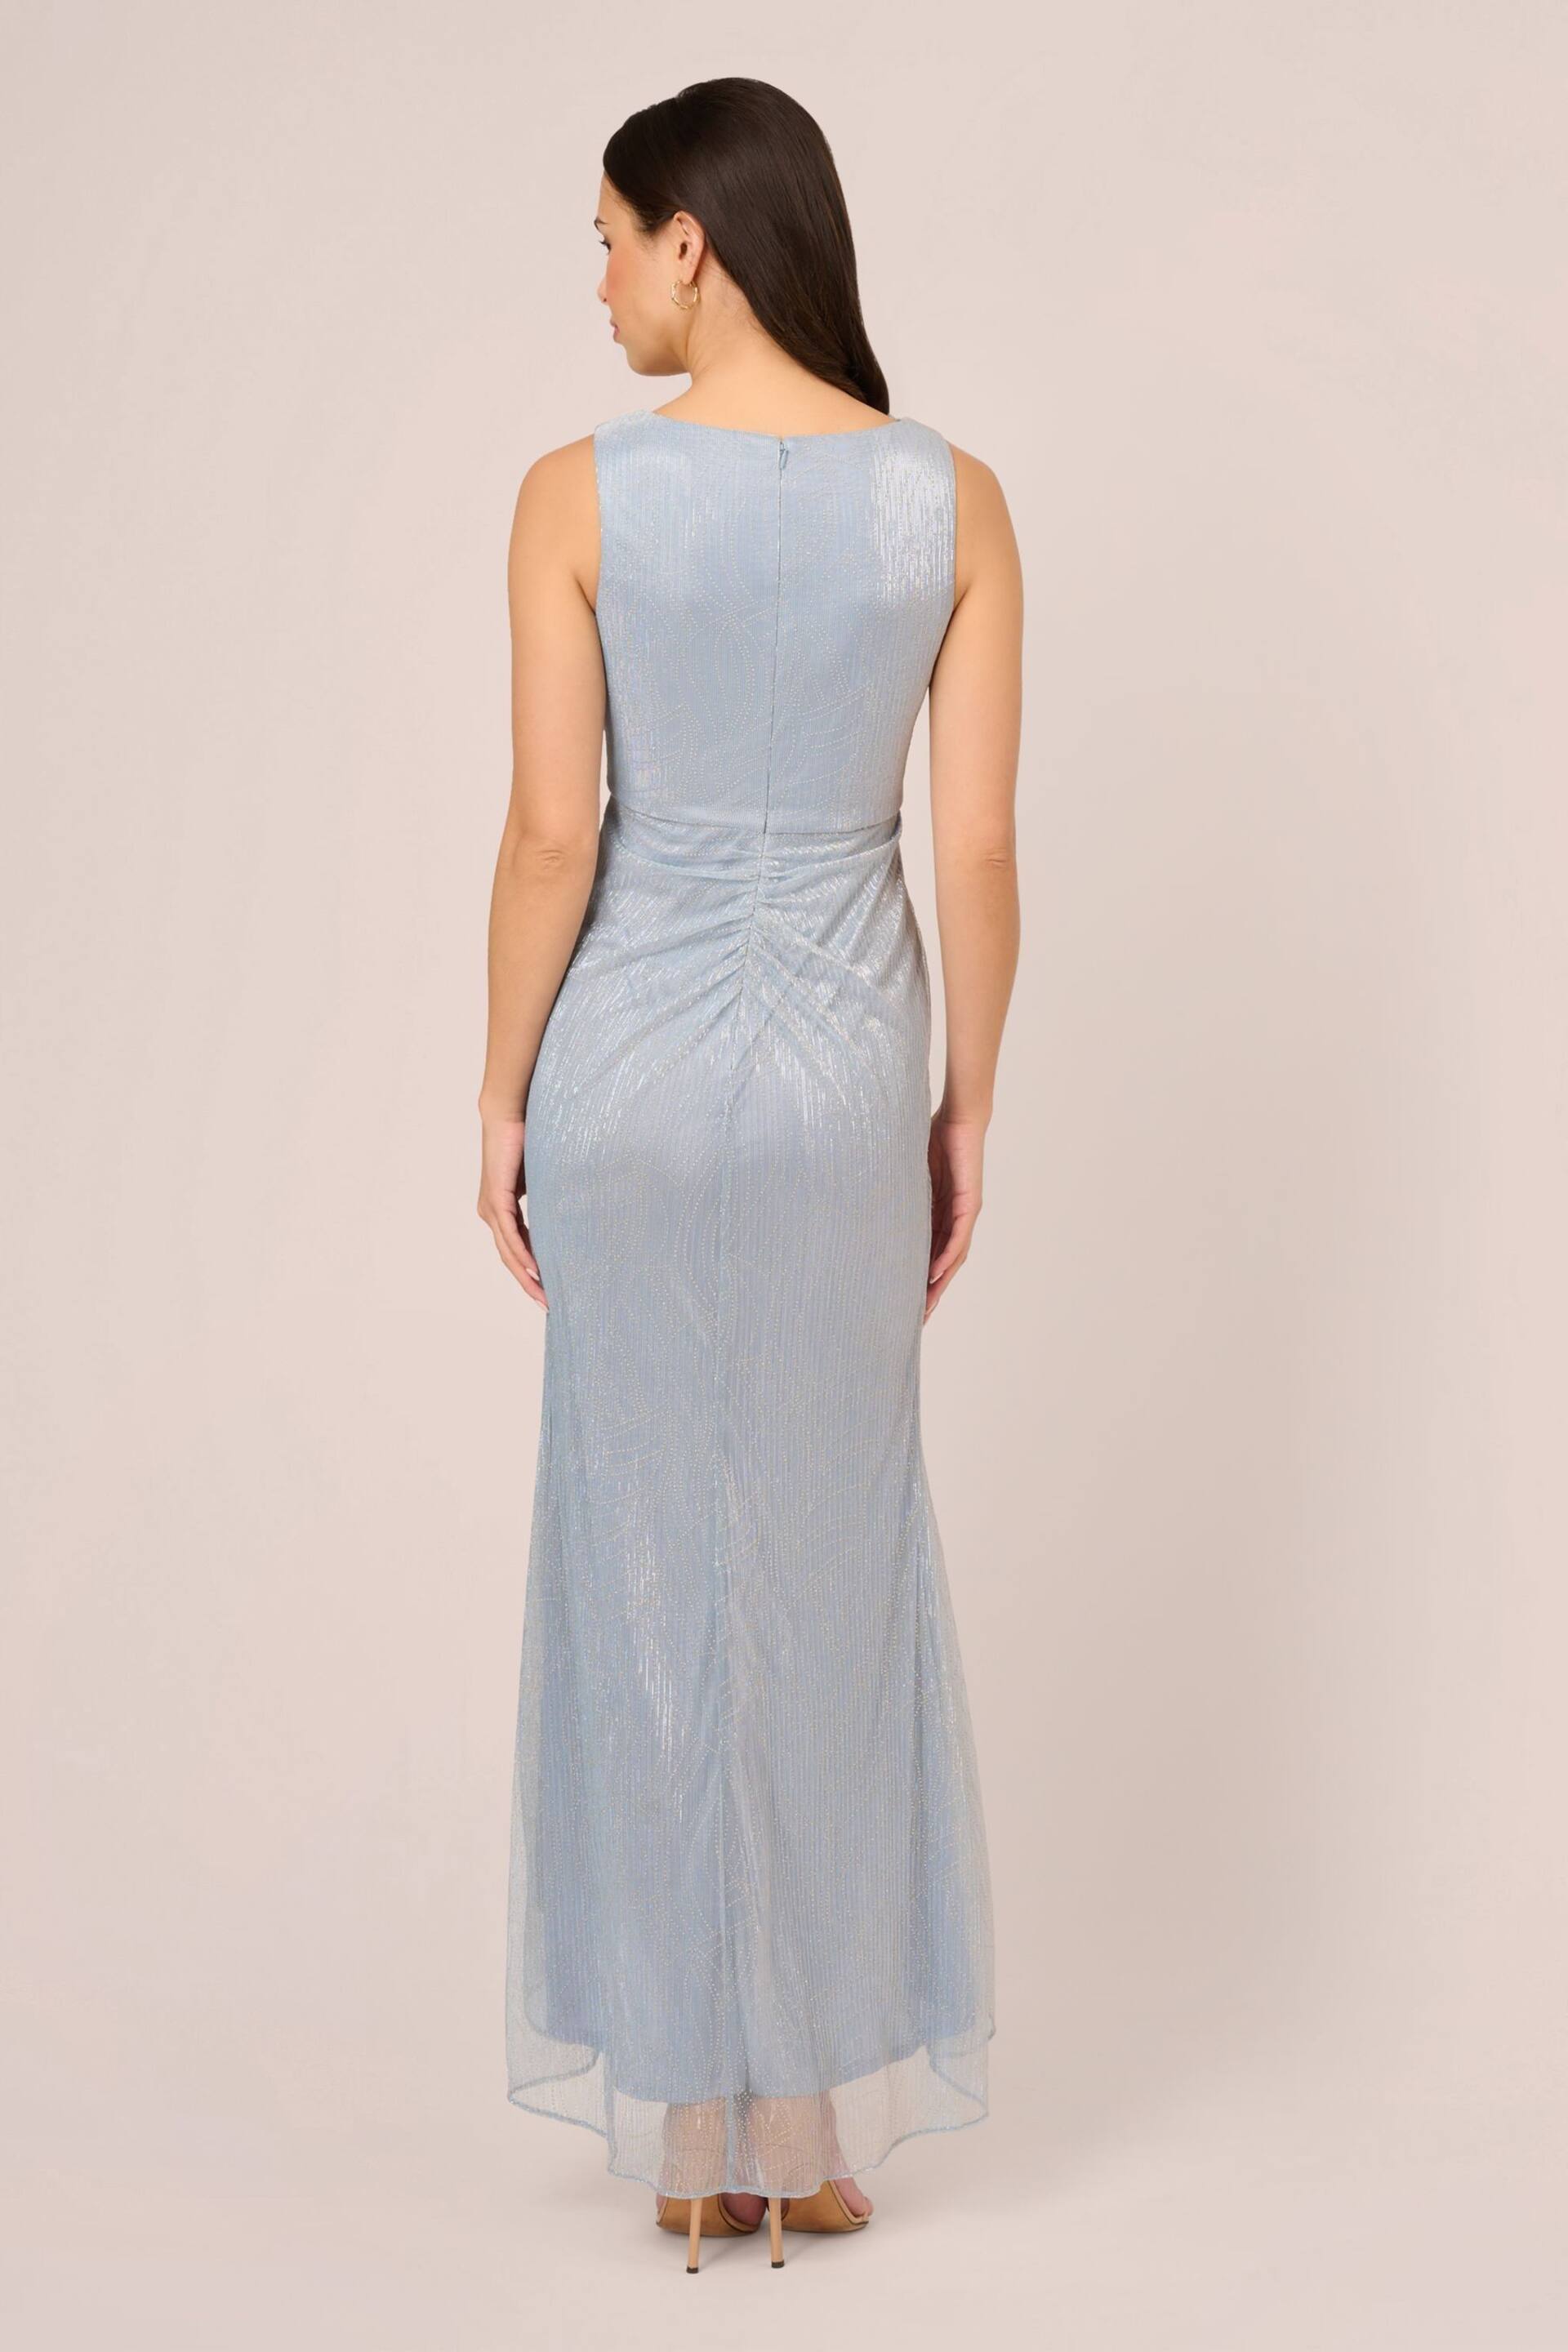 Adrianna Papell Blue Metallic Mesh Cascade Gown - Image 2 of 7